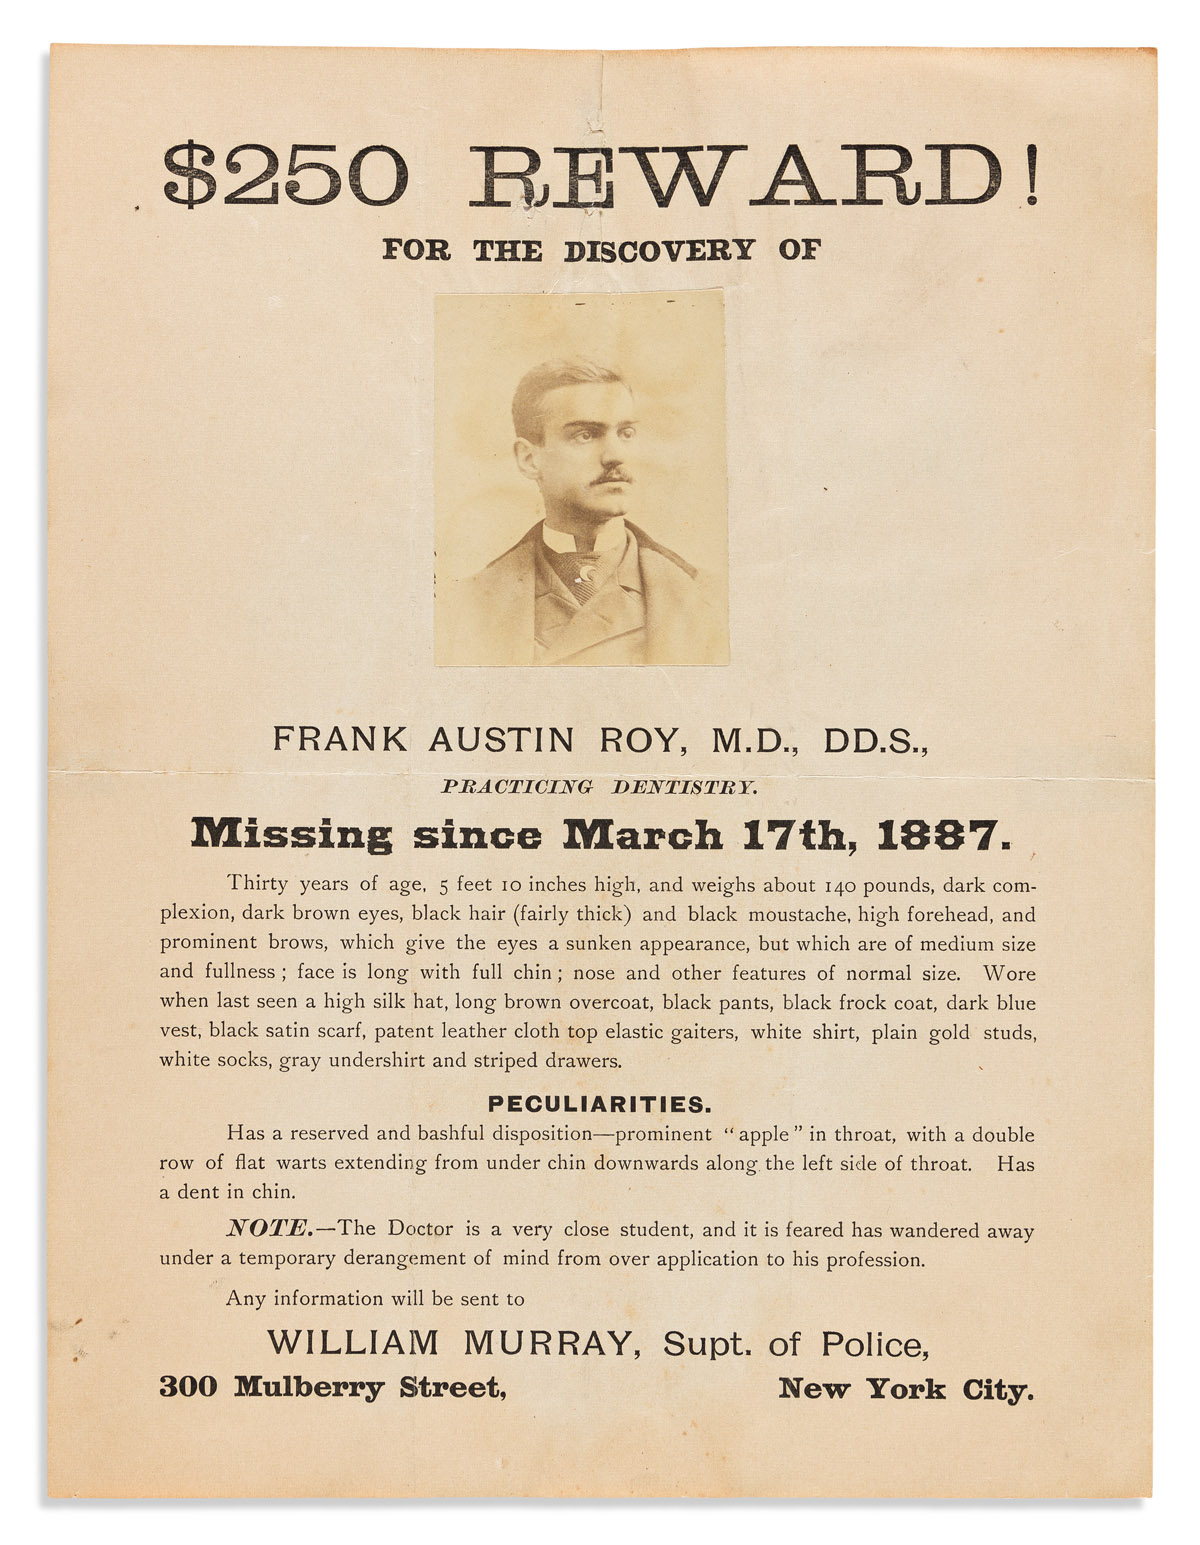 Reward Poster, Missing Dentist. $250 Reward! for the Discovery of Frank Austin Roy, M.D., DD.S., Practicing Dentistry.